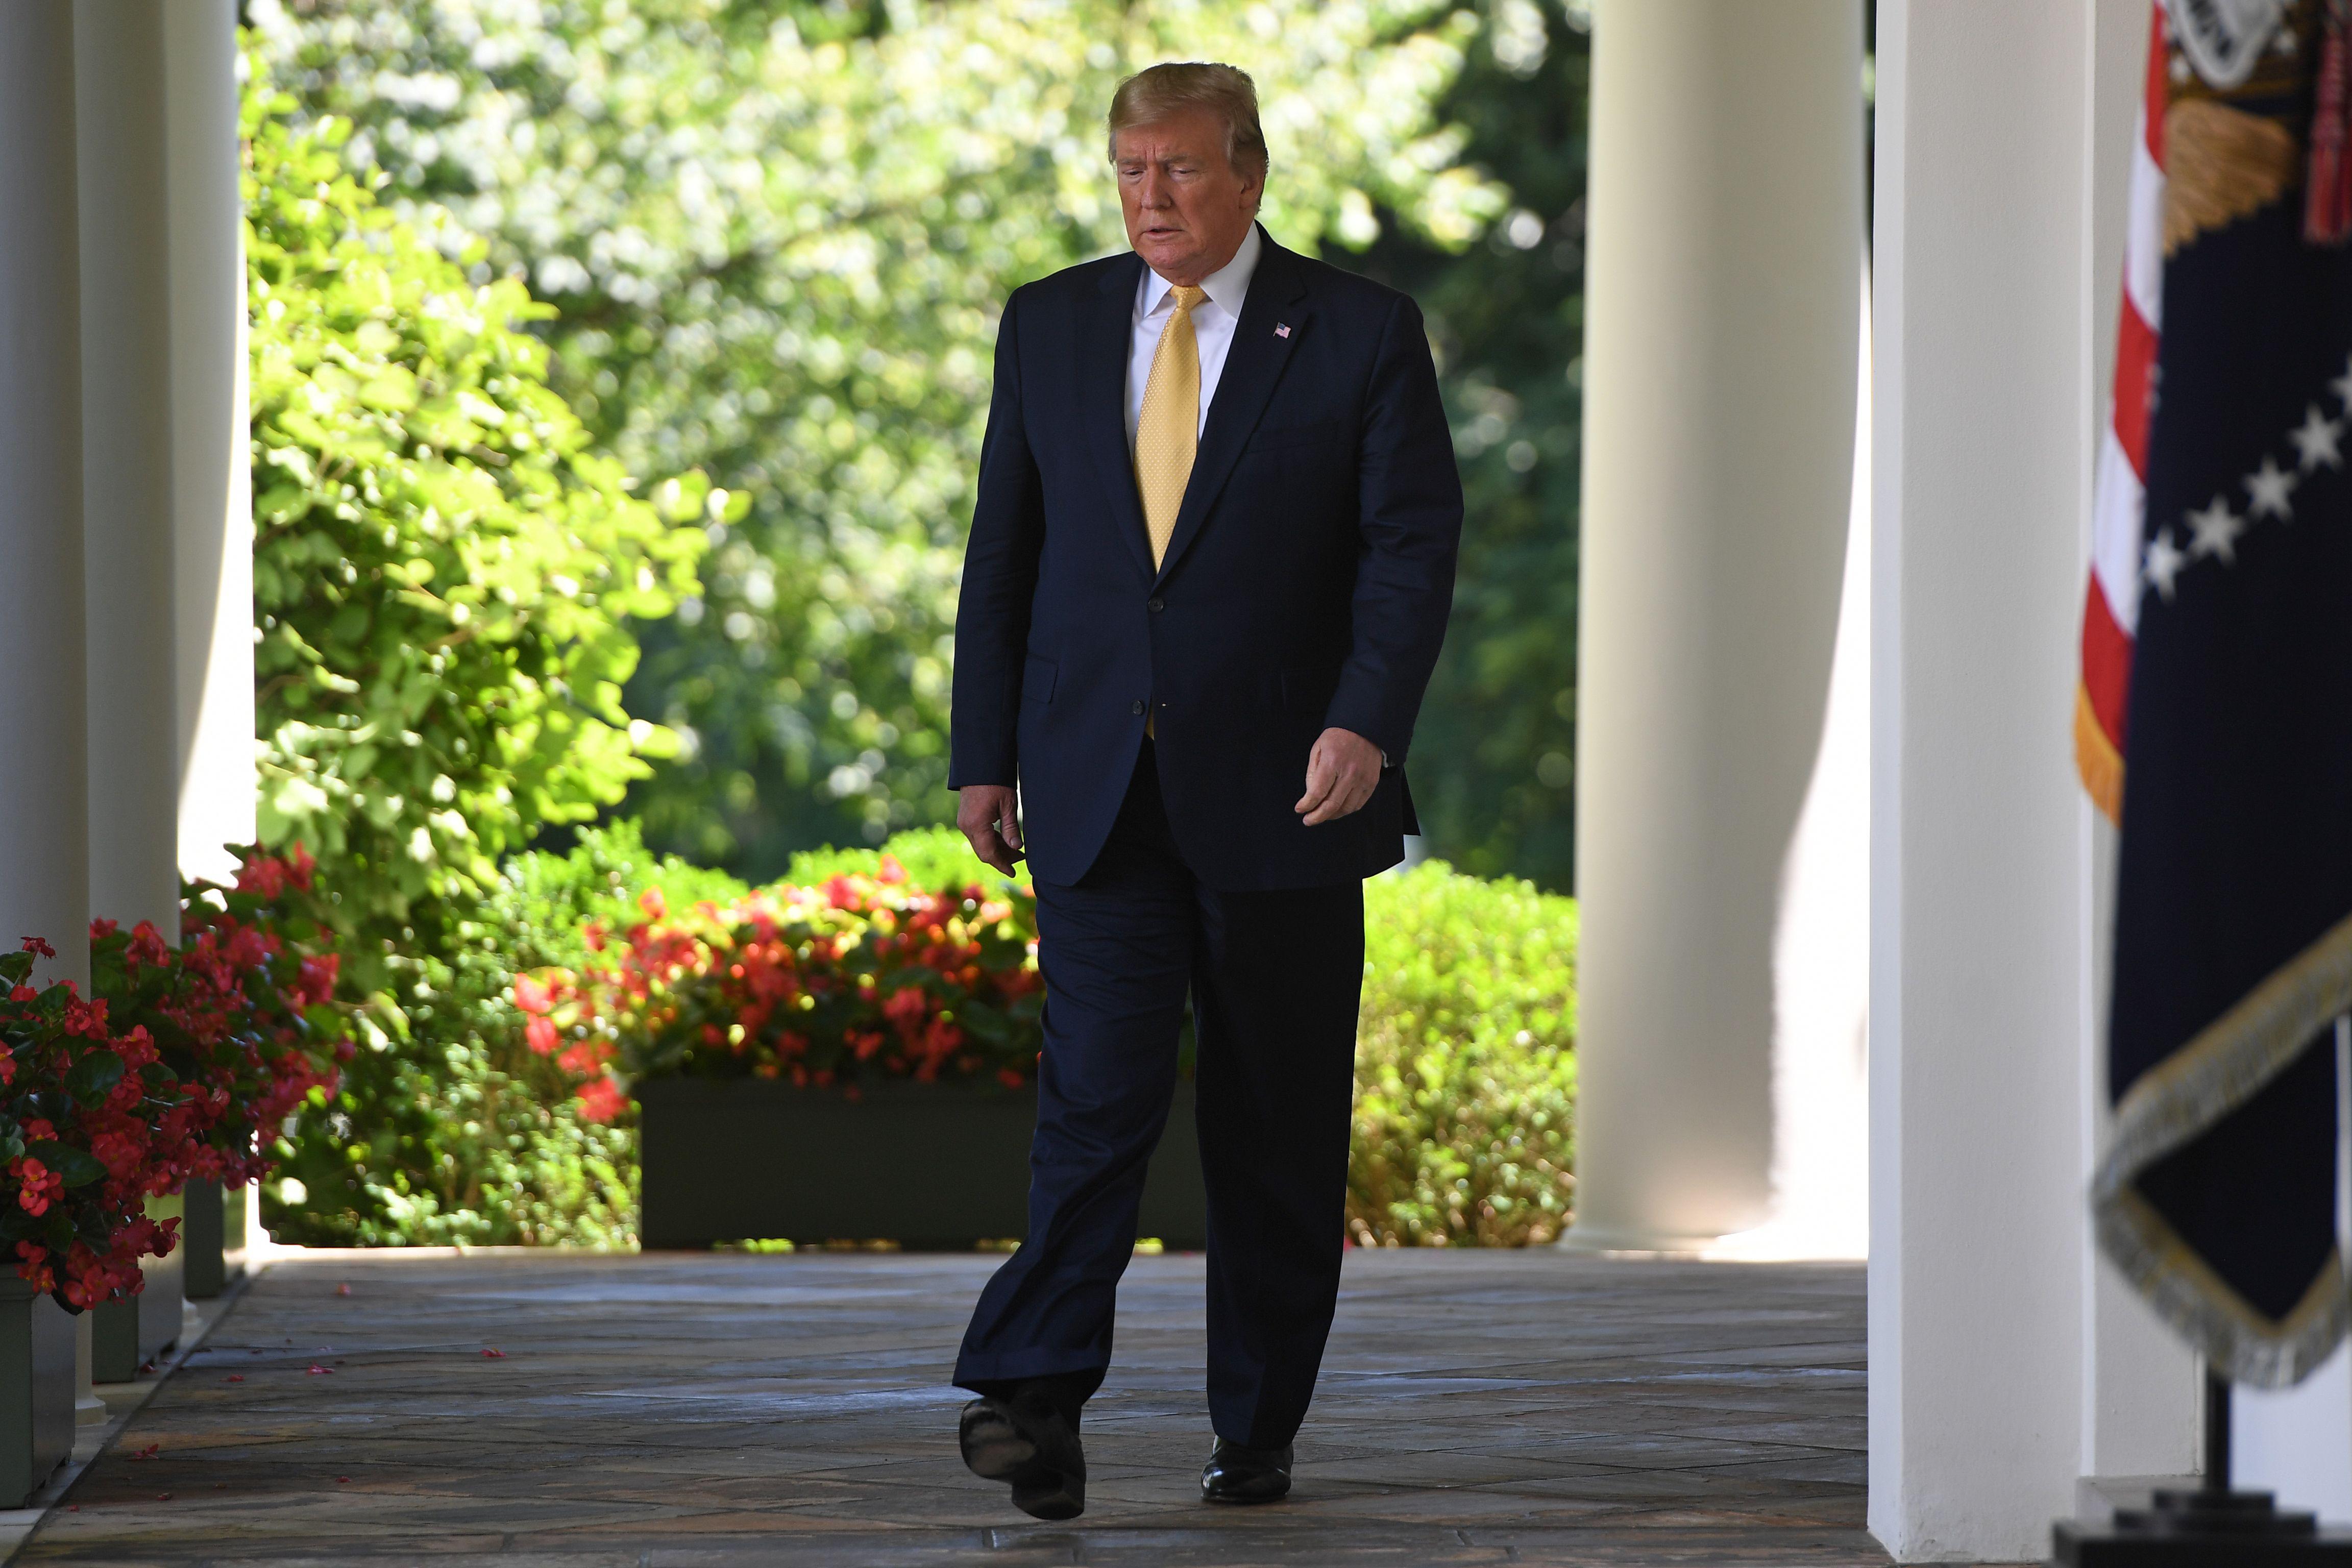 President Donald Trump walks to the Rose Garden of the White House.